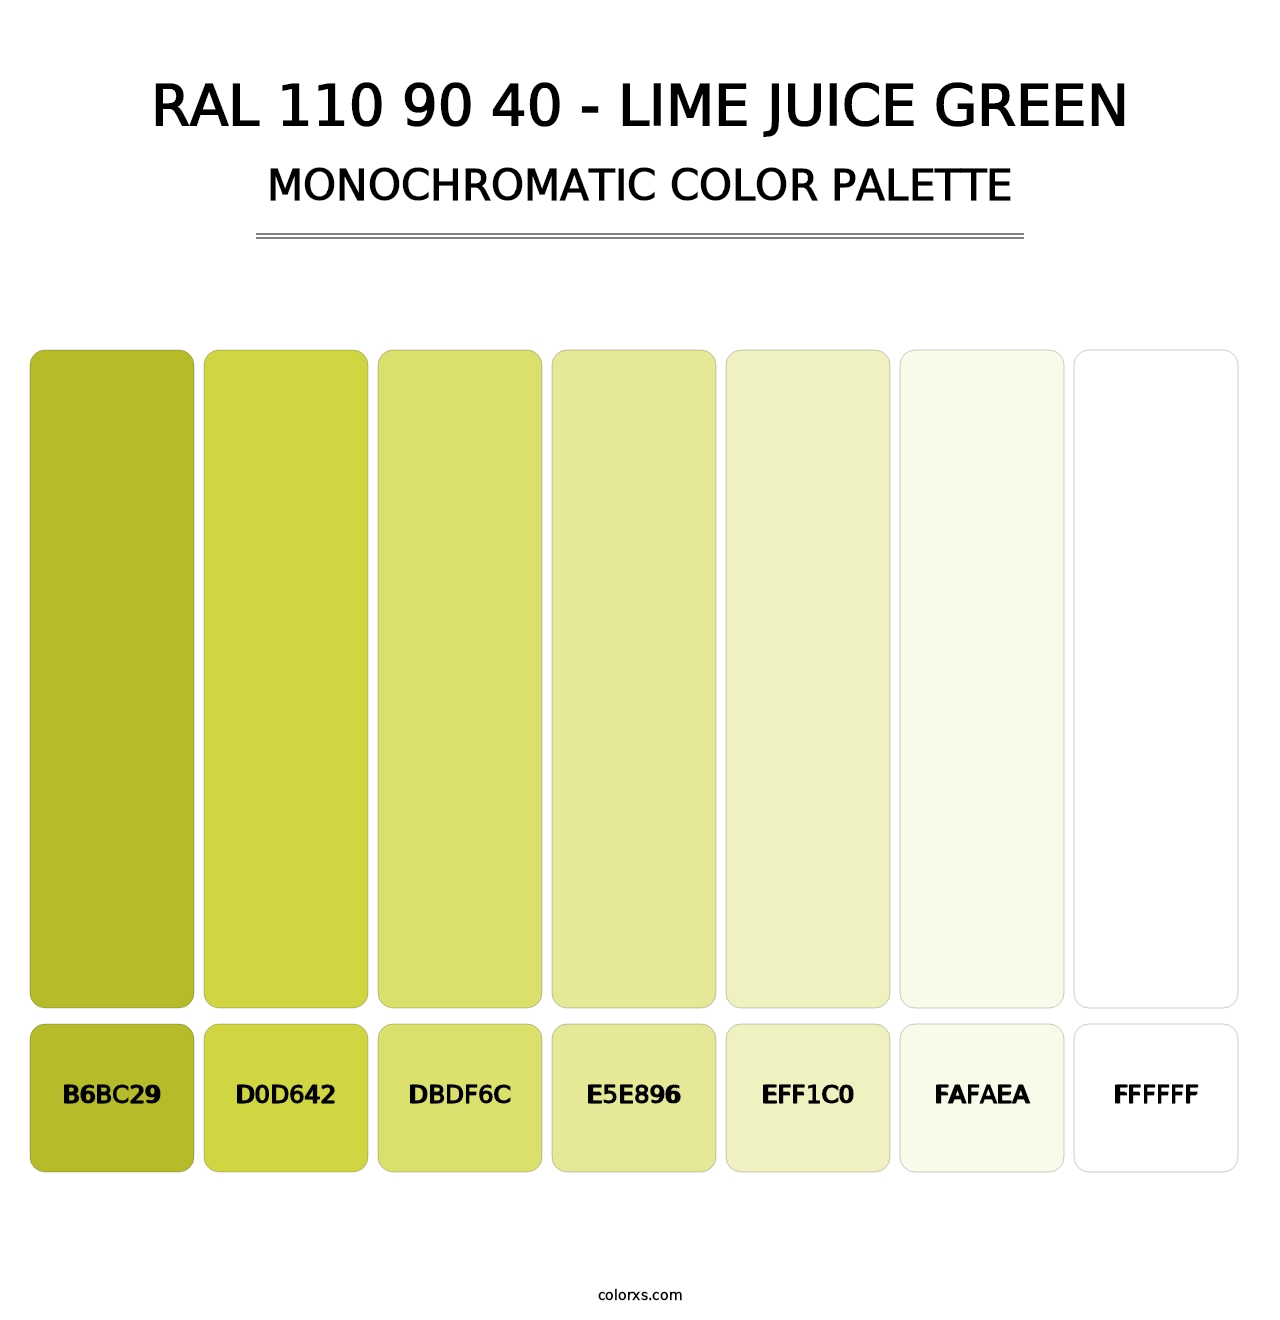 RAL 110 90 40 - Lime Juice Green - Monochromatic Color Palette